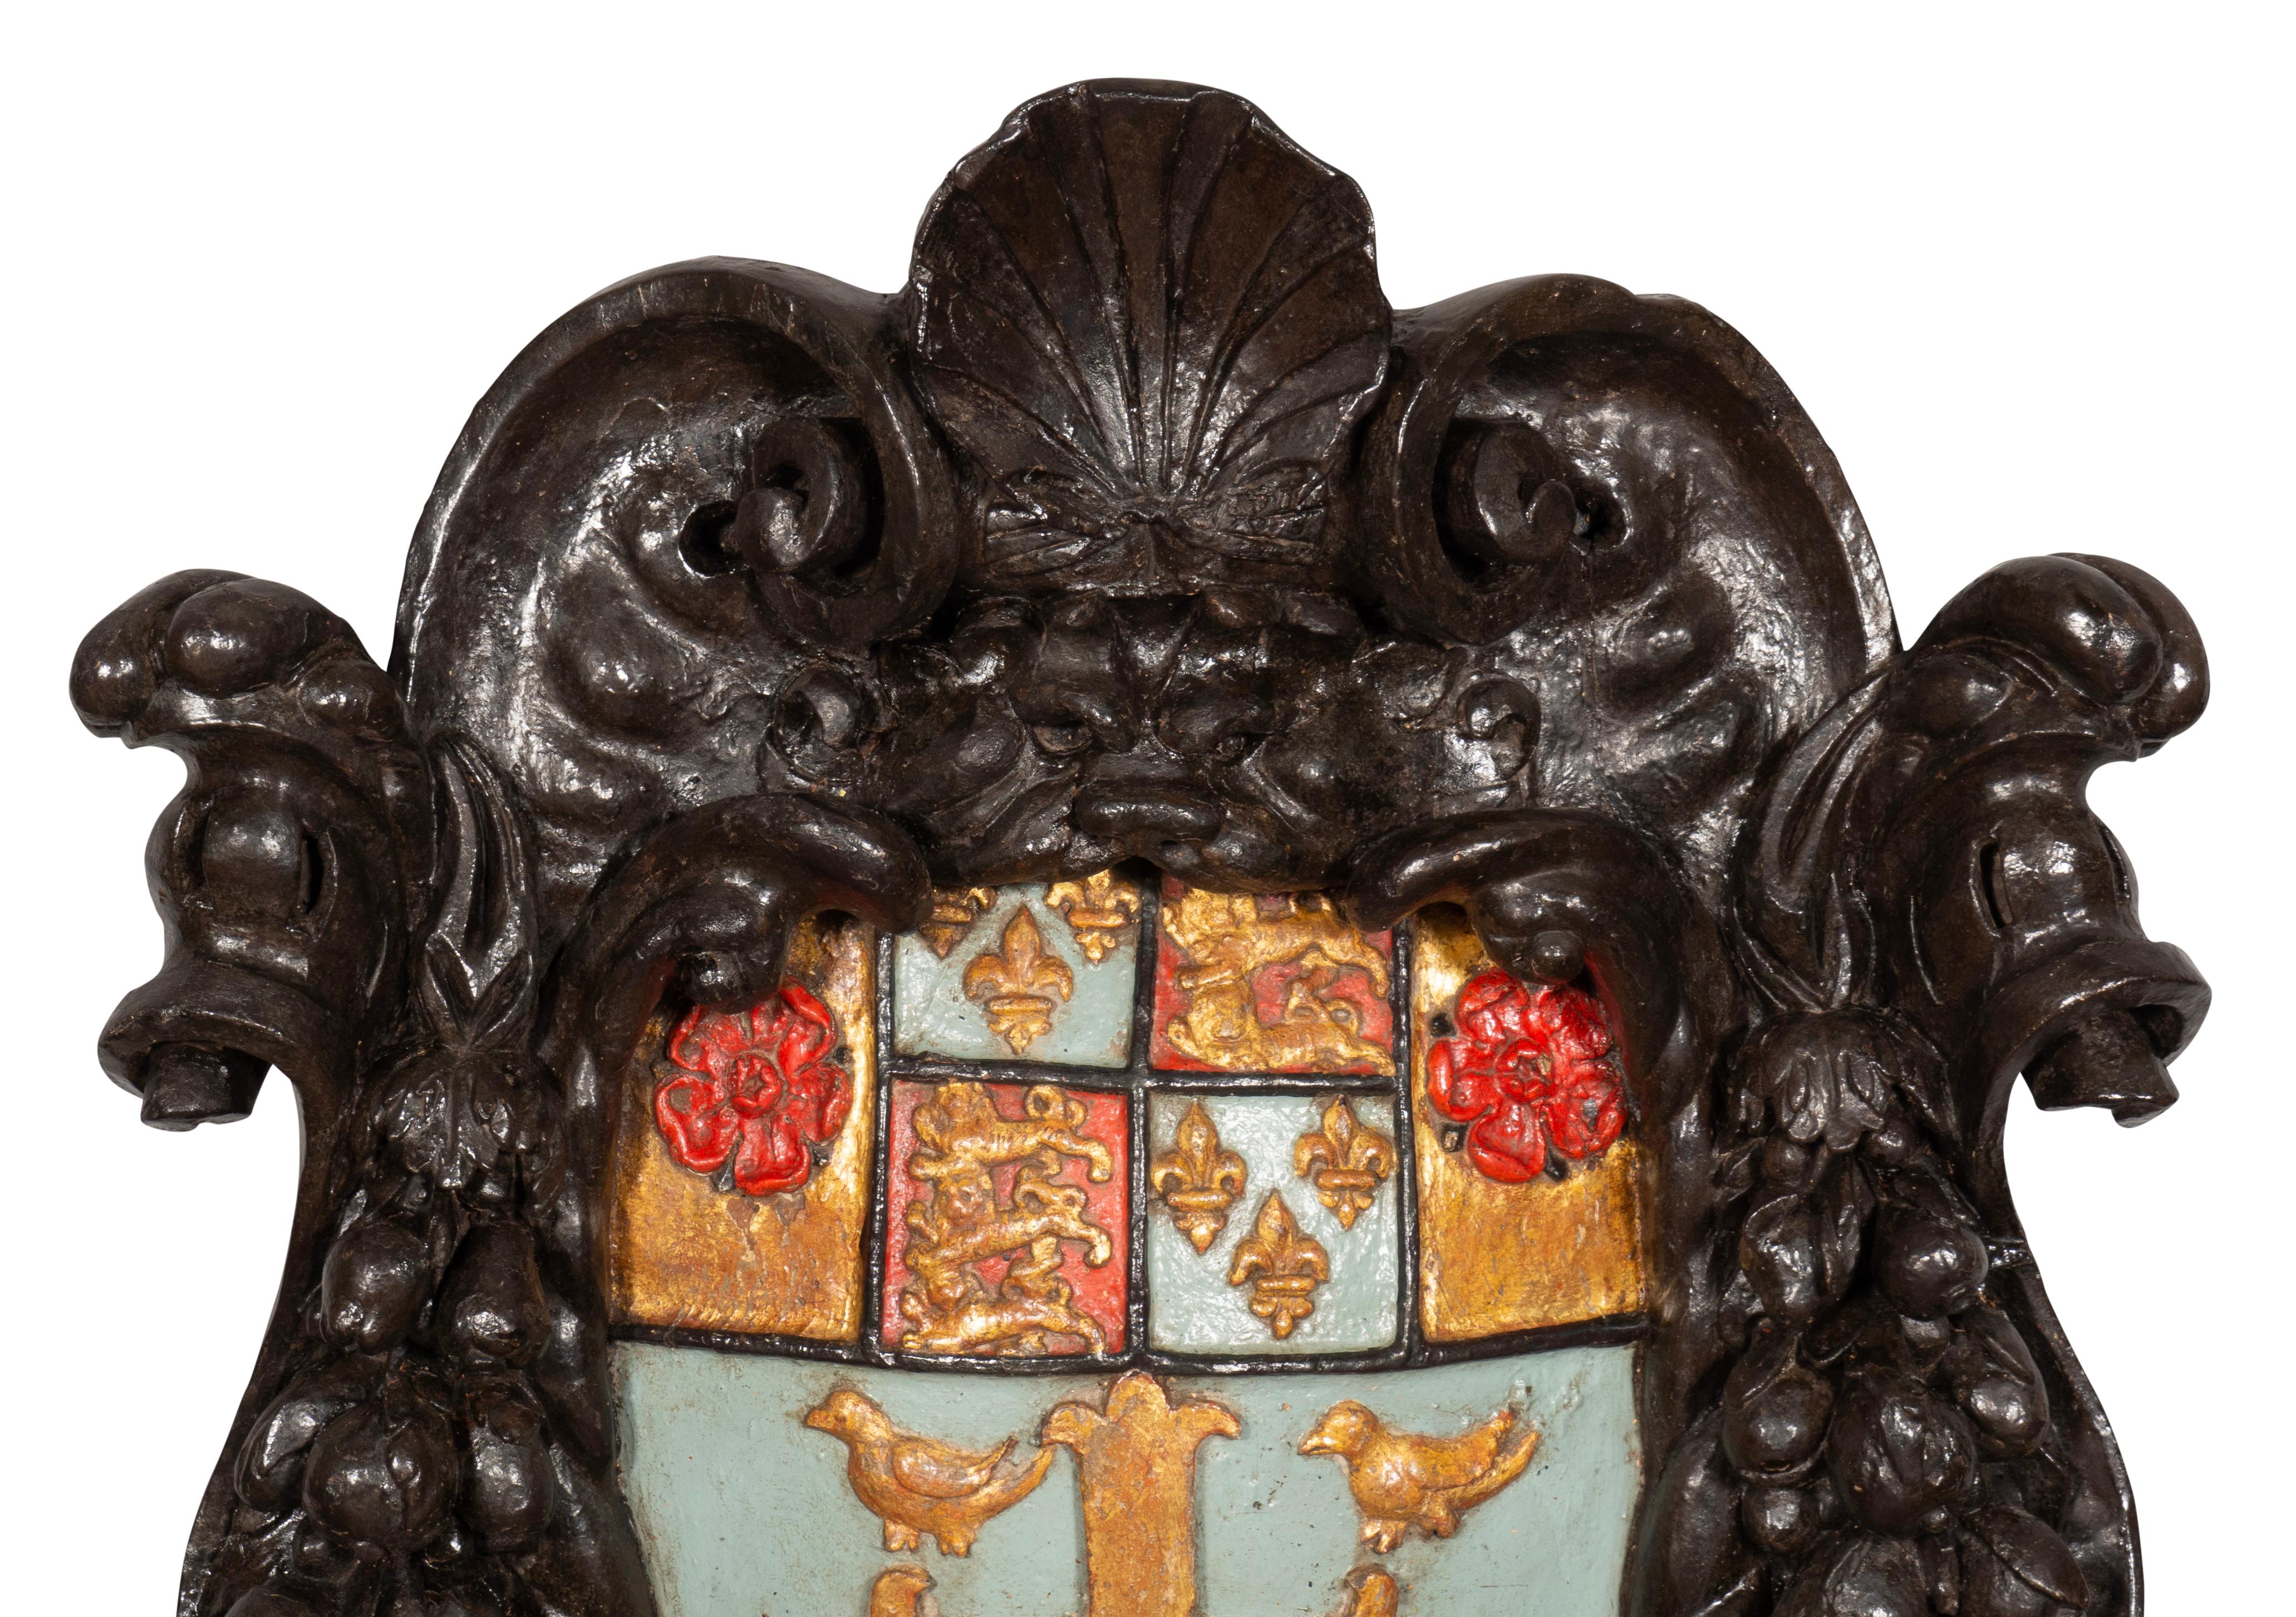 A large crest with shell and scroll carved frame enclosing an azure ground with gilded coat of arms featuring a cross with four birds over lions and fleur de lis and Tudor roses. Only difference between Westminster Abbeys coat of arms and